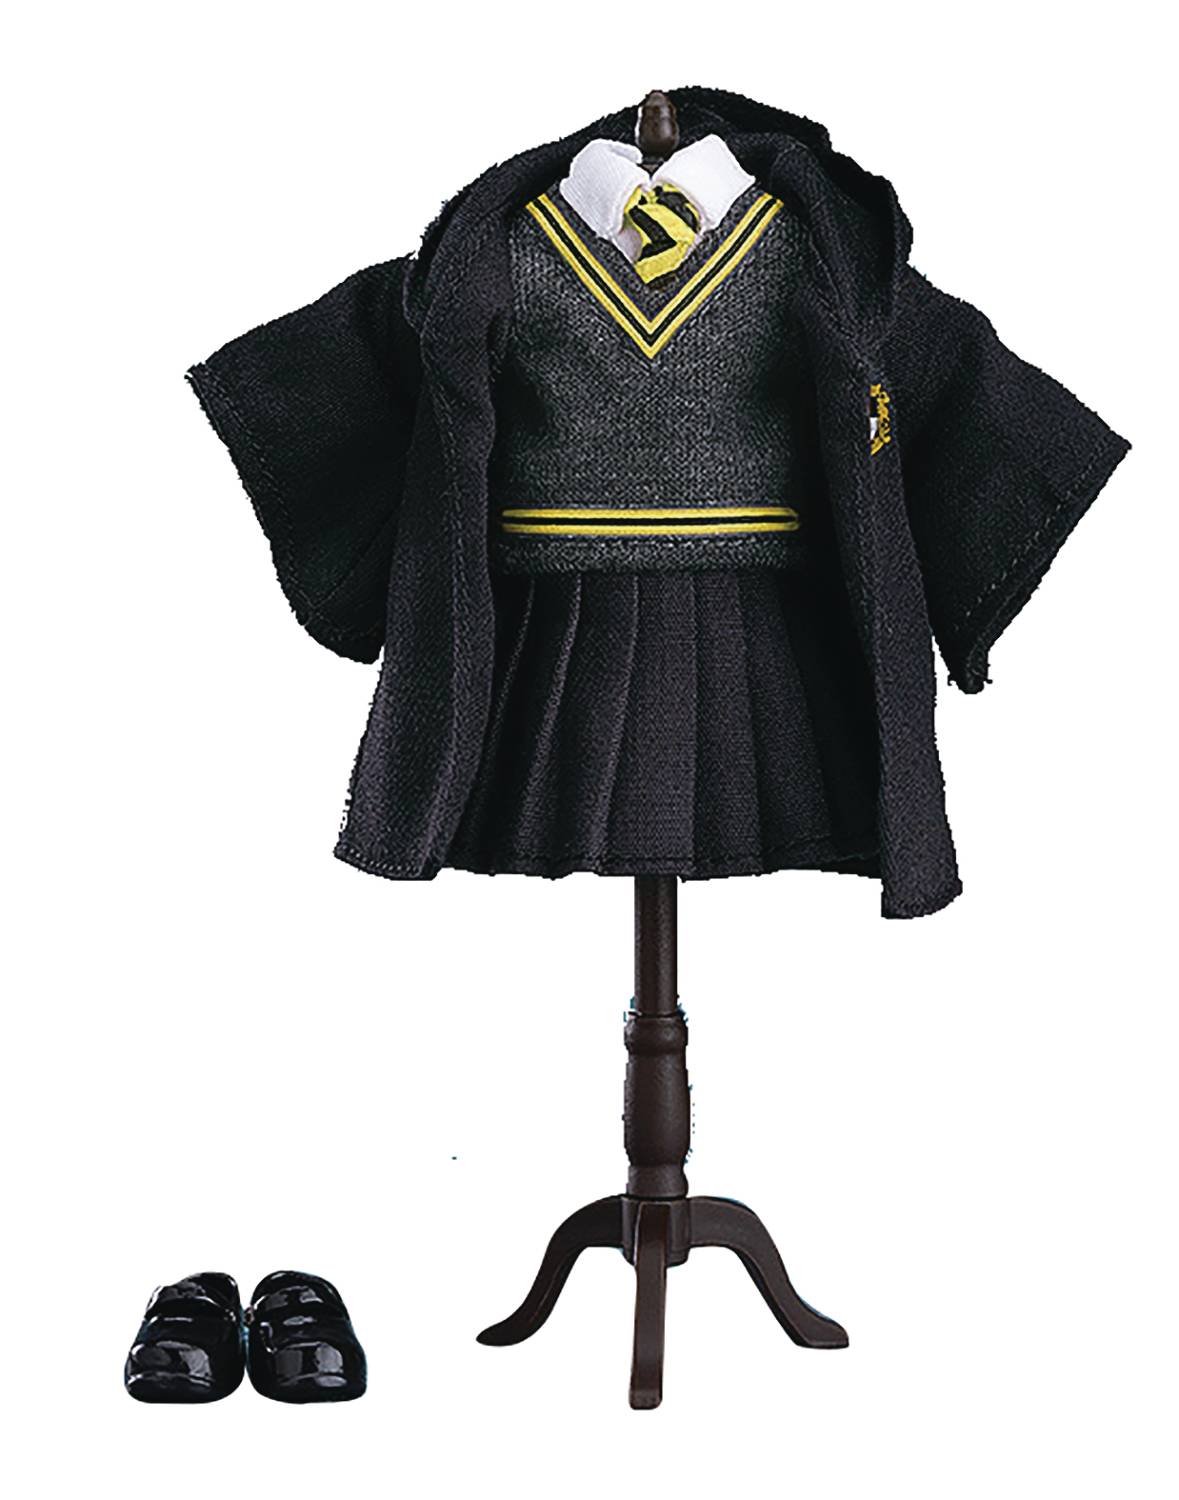 SEP208793 - HARRY POTTER NENDOROID DOLL OUTFIT SET HUFFLEPUFF GIRL -  Previews World